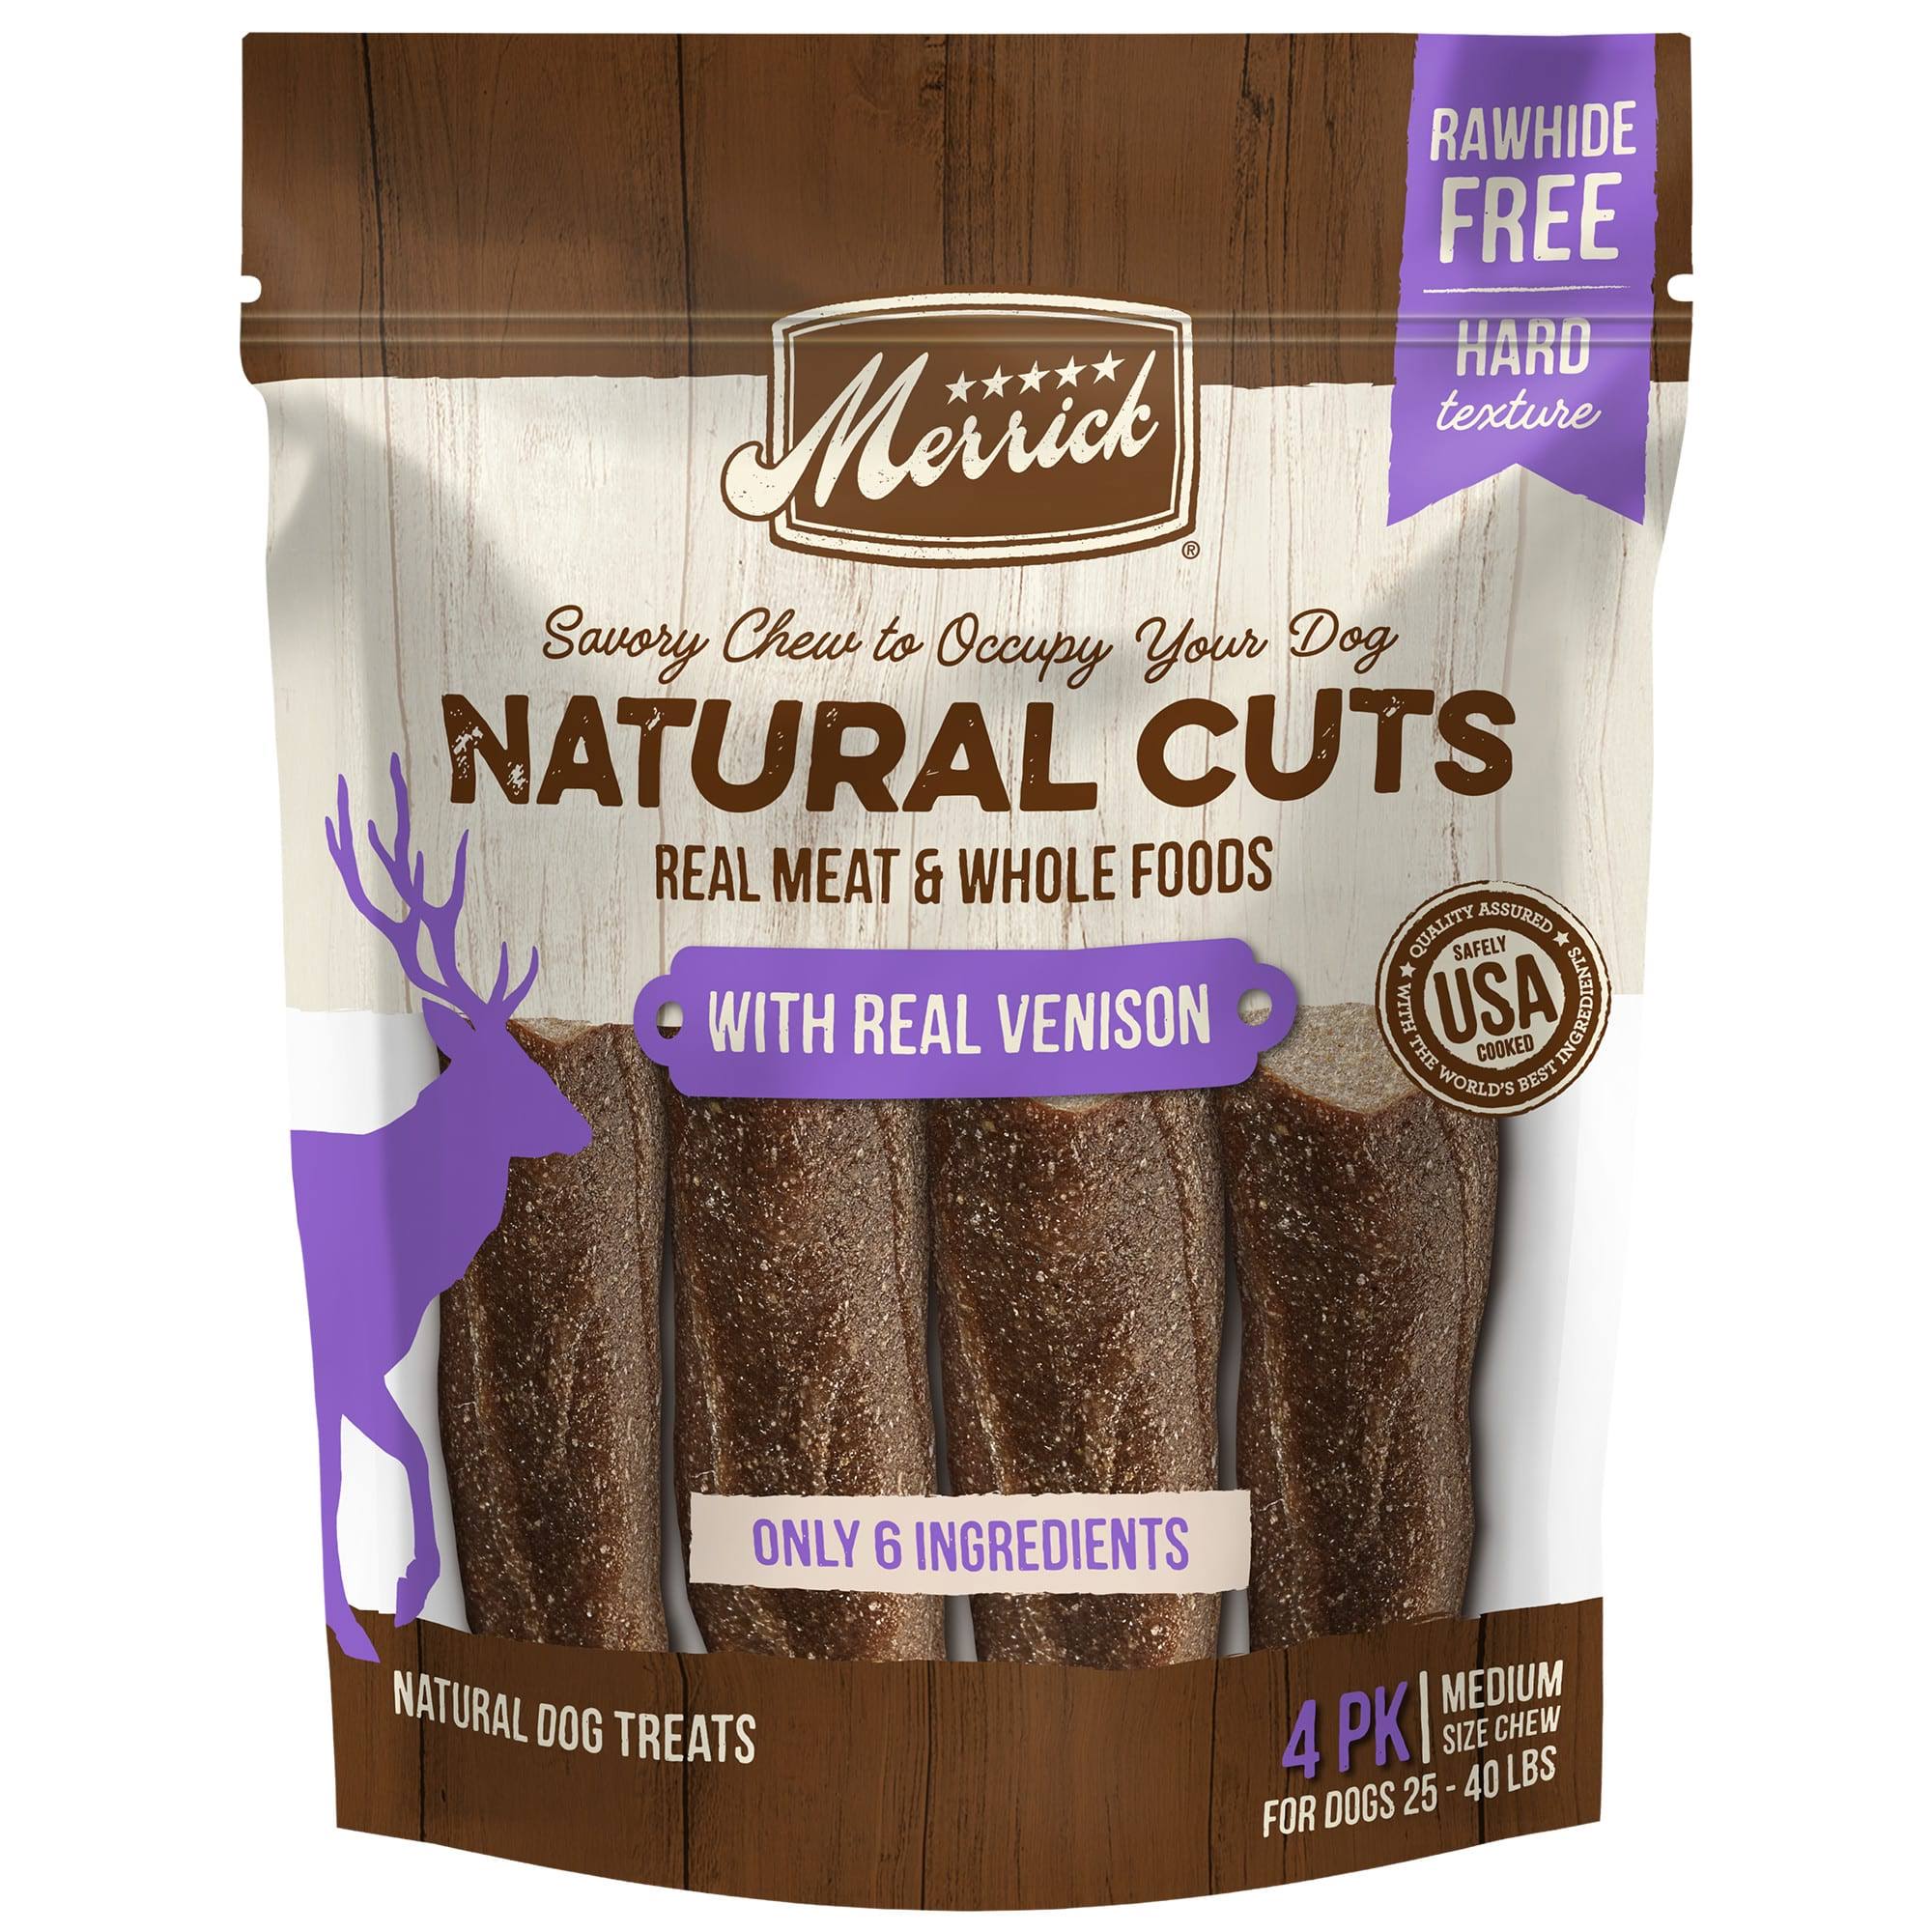 Merrick Natural Cuts with Real Venison Dog, Medium Chew - 4 Count